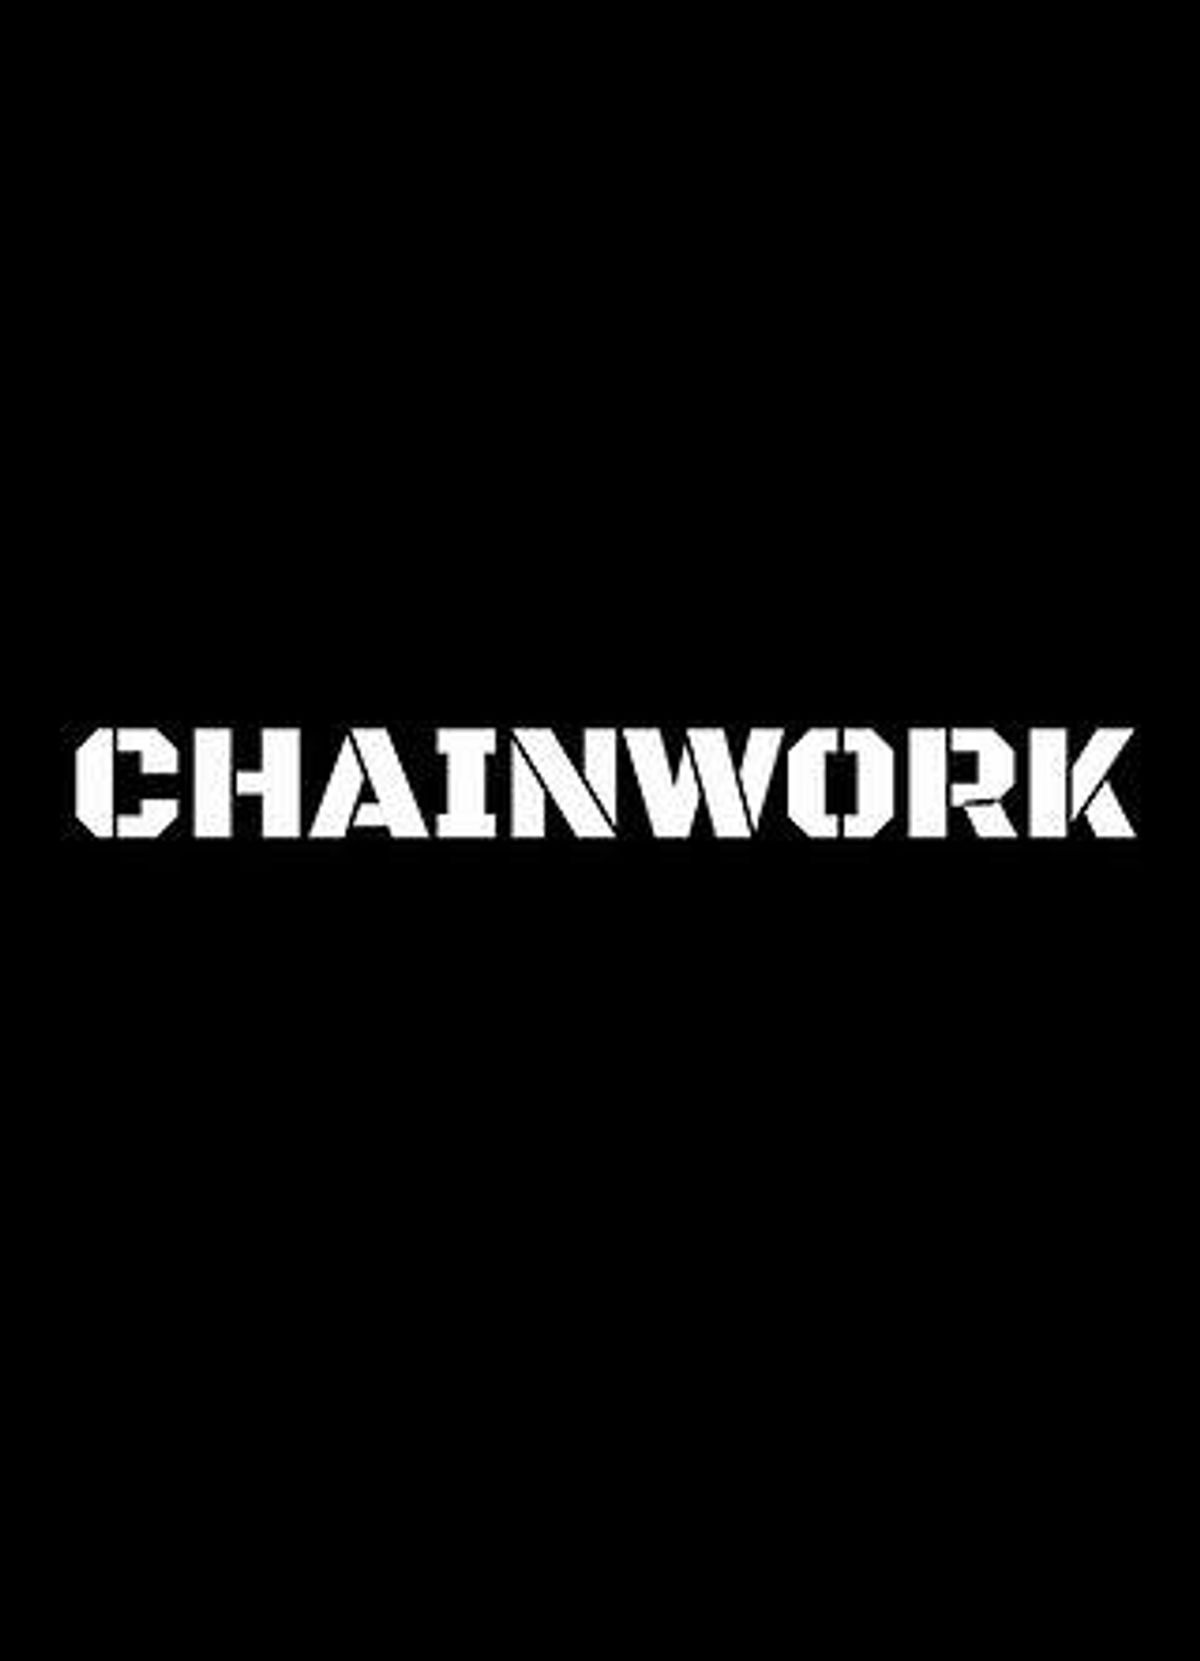 Physical Therapist and Co-Founder of Chainwork